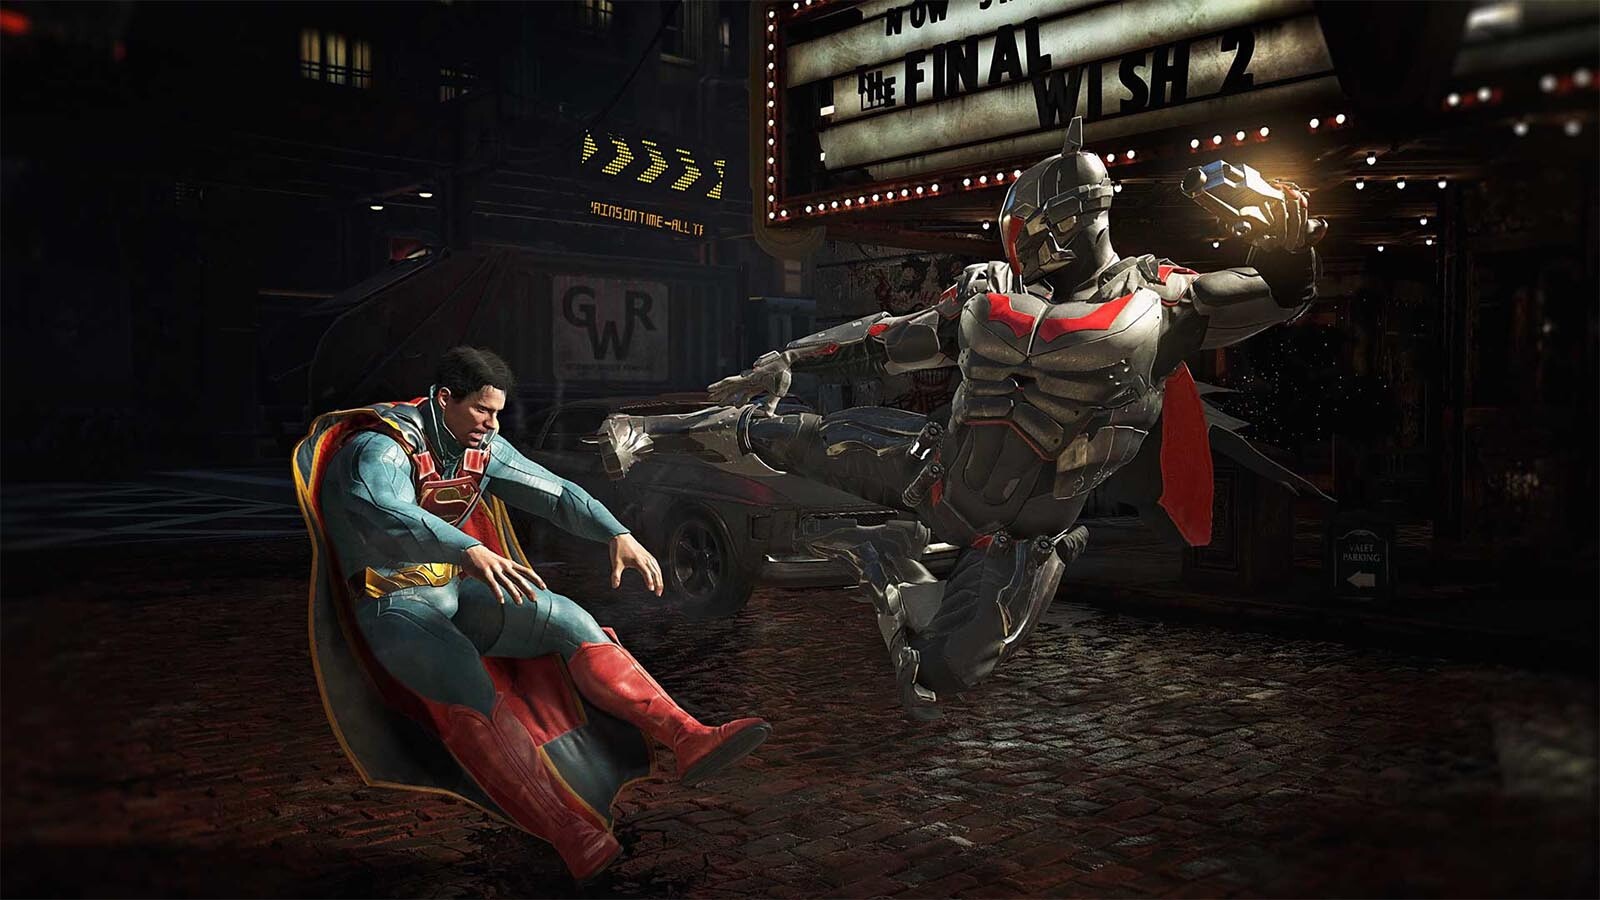 Mortal Kombat and DC Comics characters look outstanding in these highly  detailed Injustice 2 screenshots